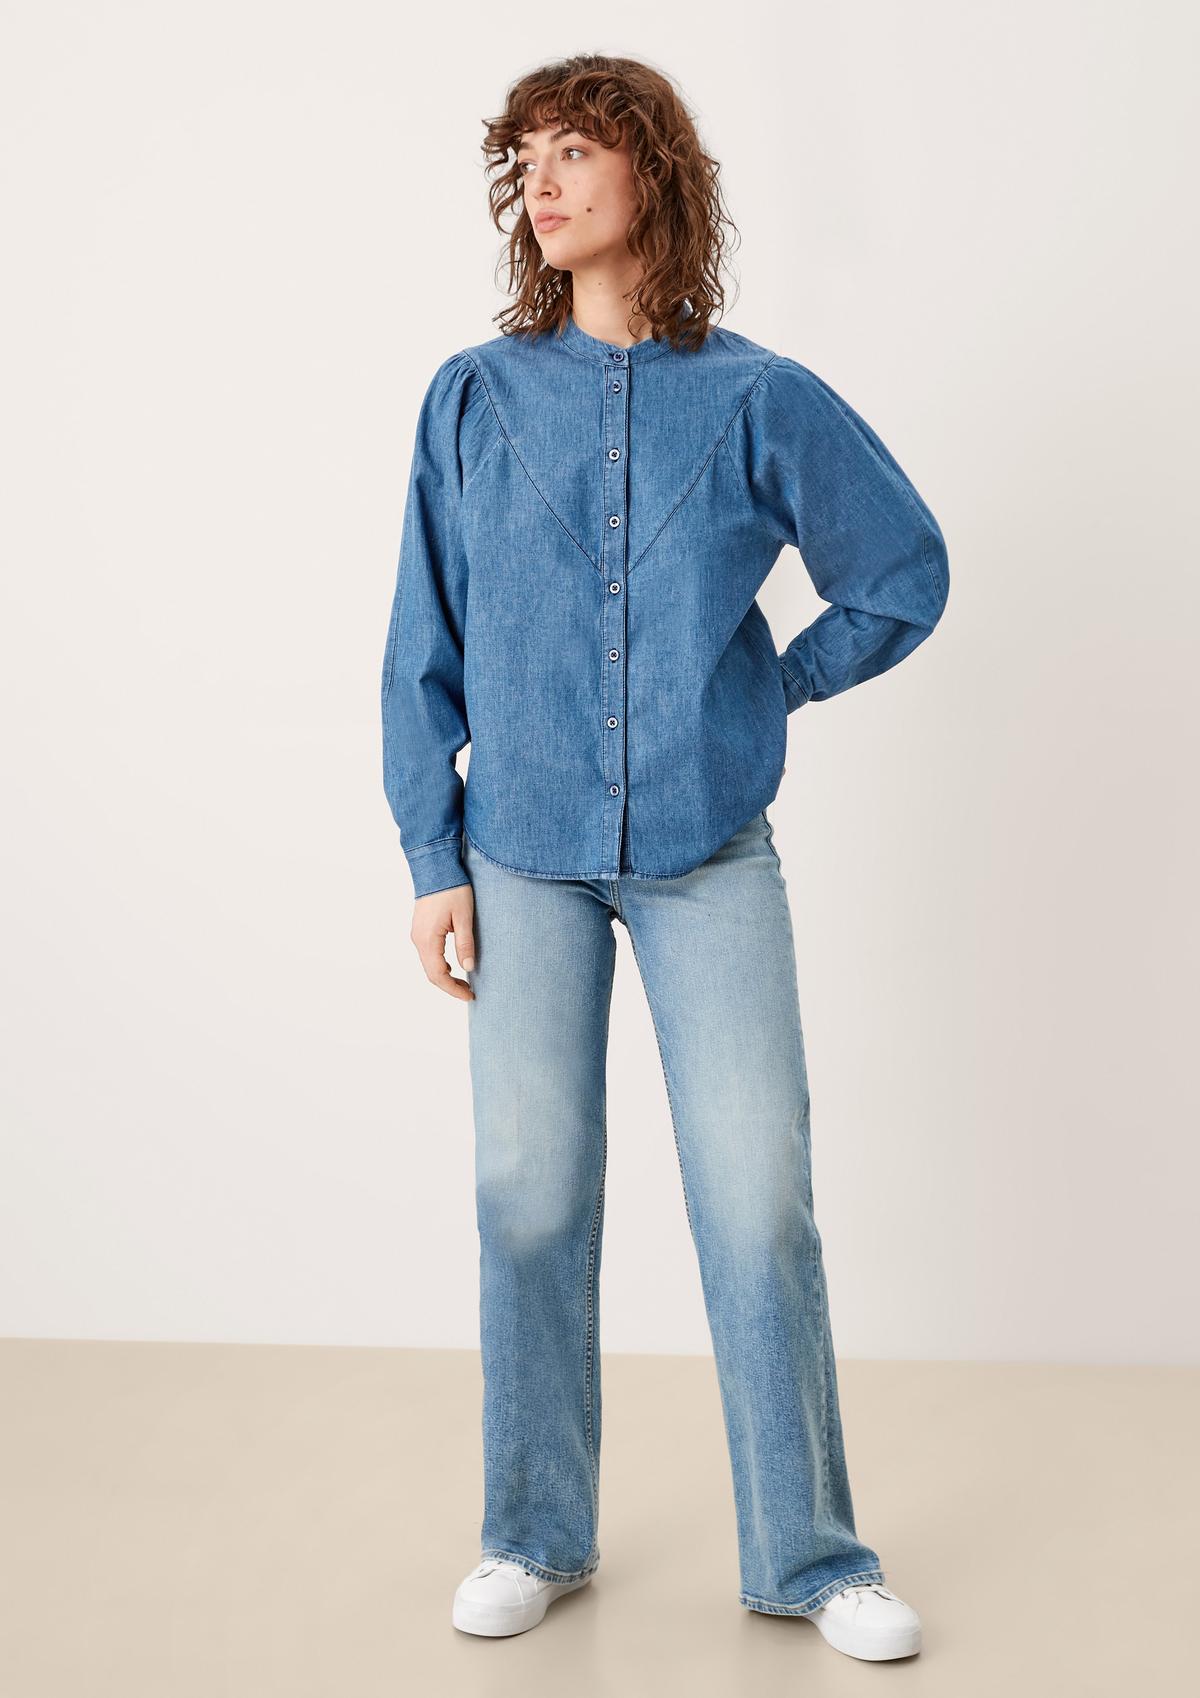 s.Oliver Light denim blouse with a stand-up collar